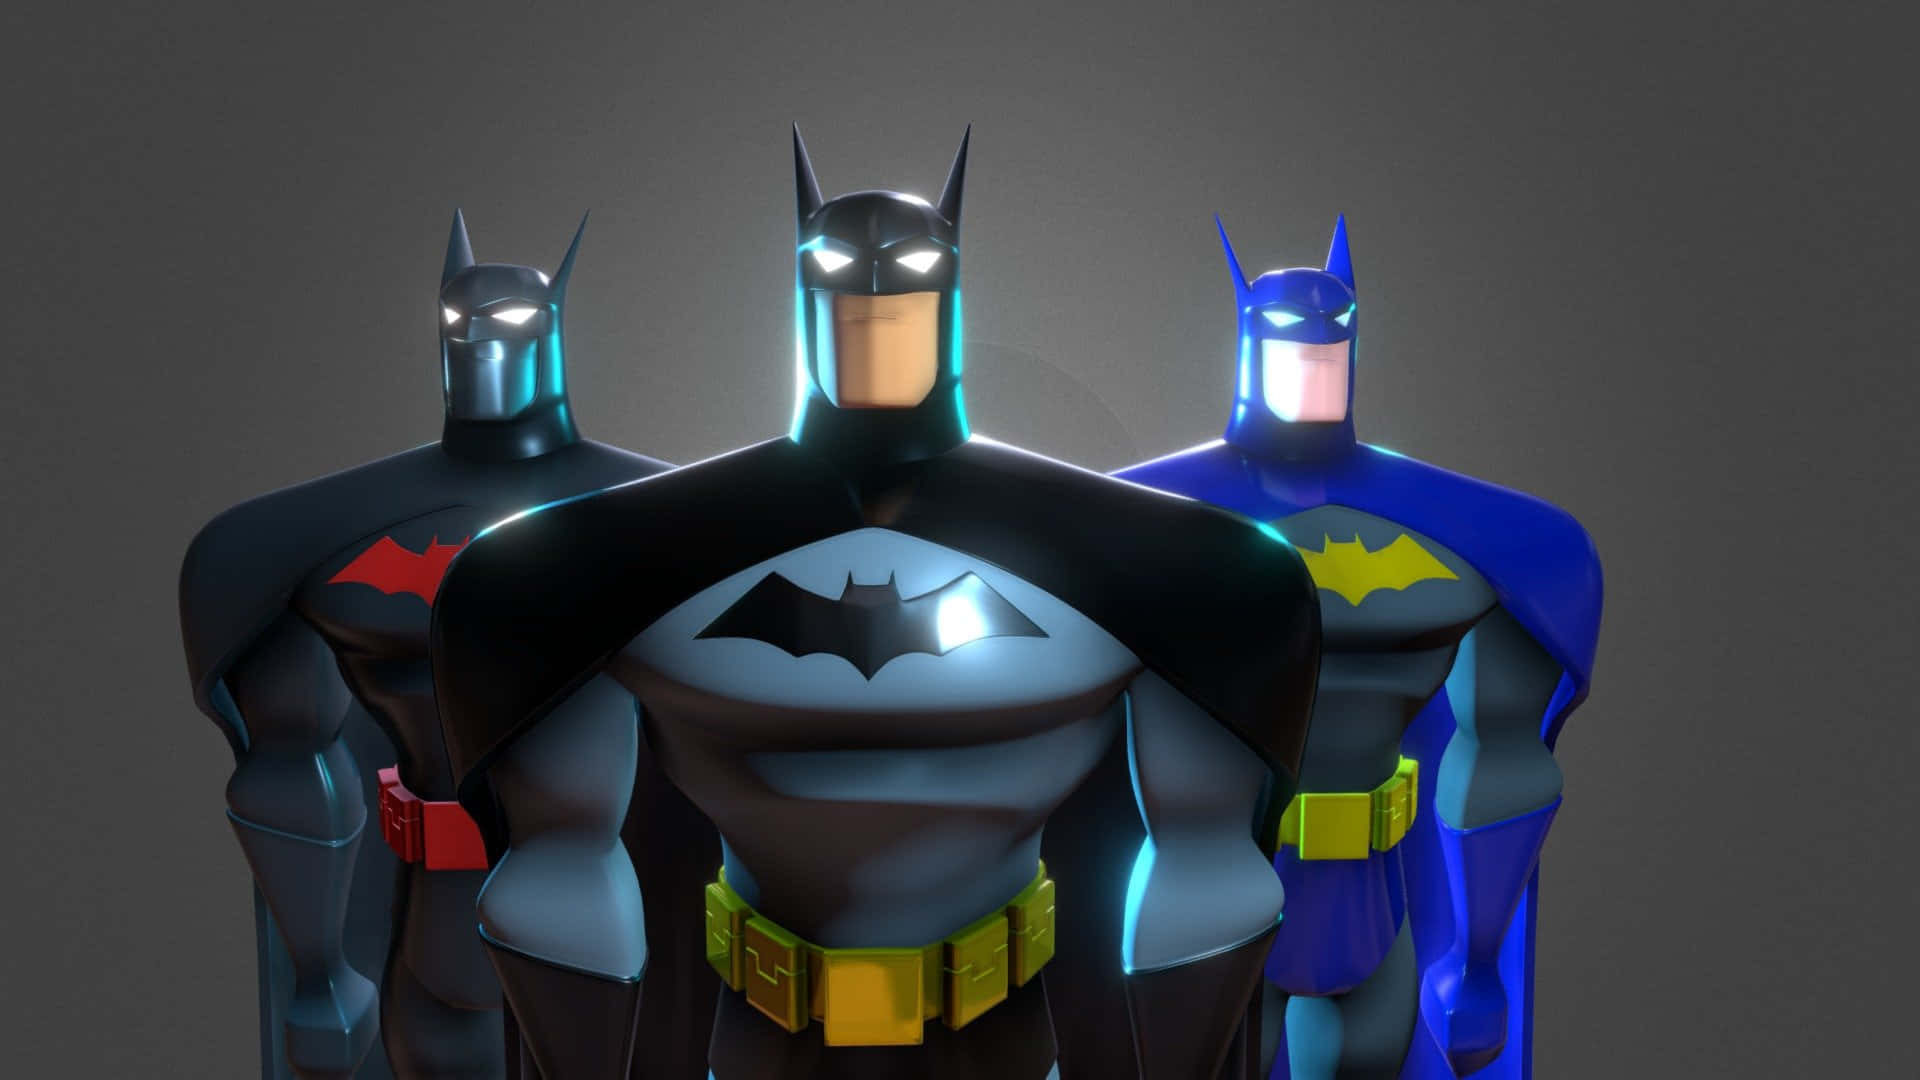 Batman and Robin in Action in Batman: The Animated Series Wallpaper